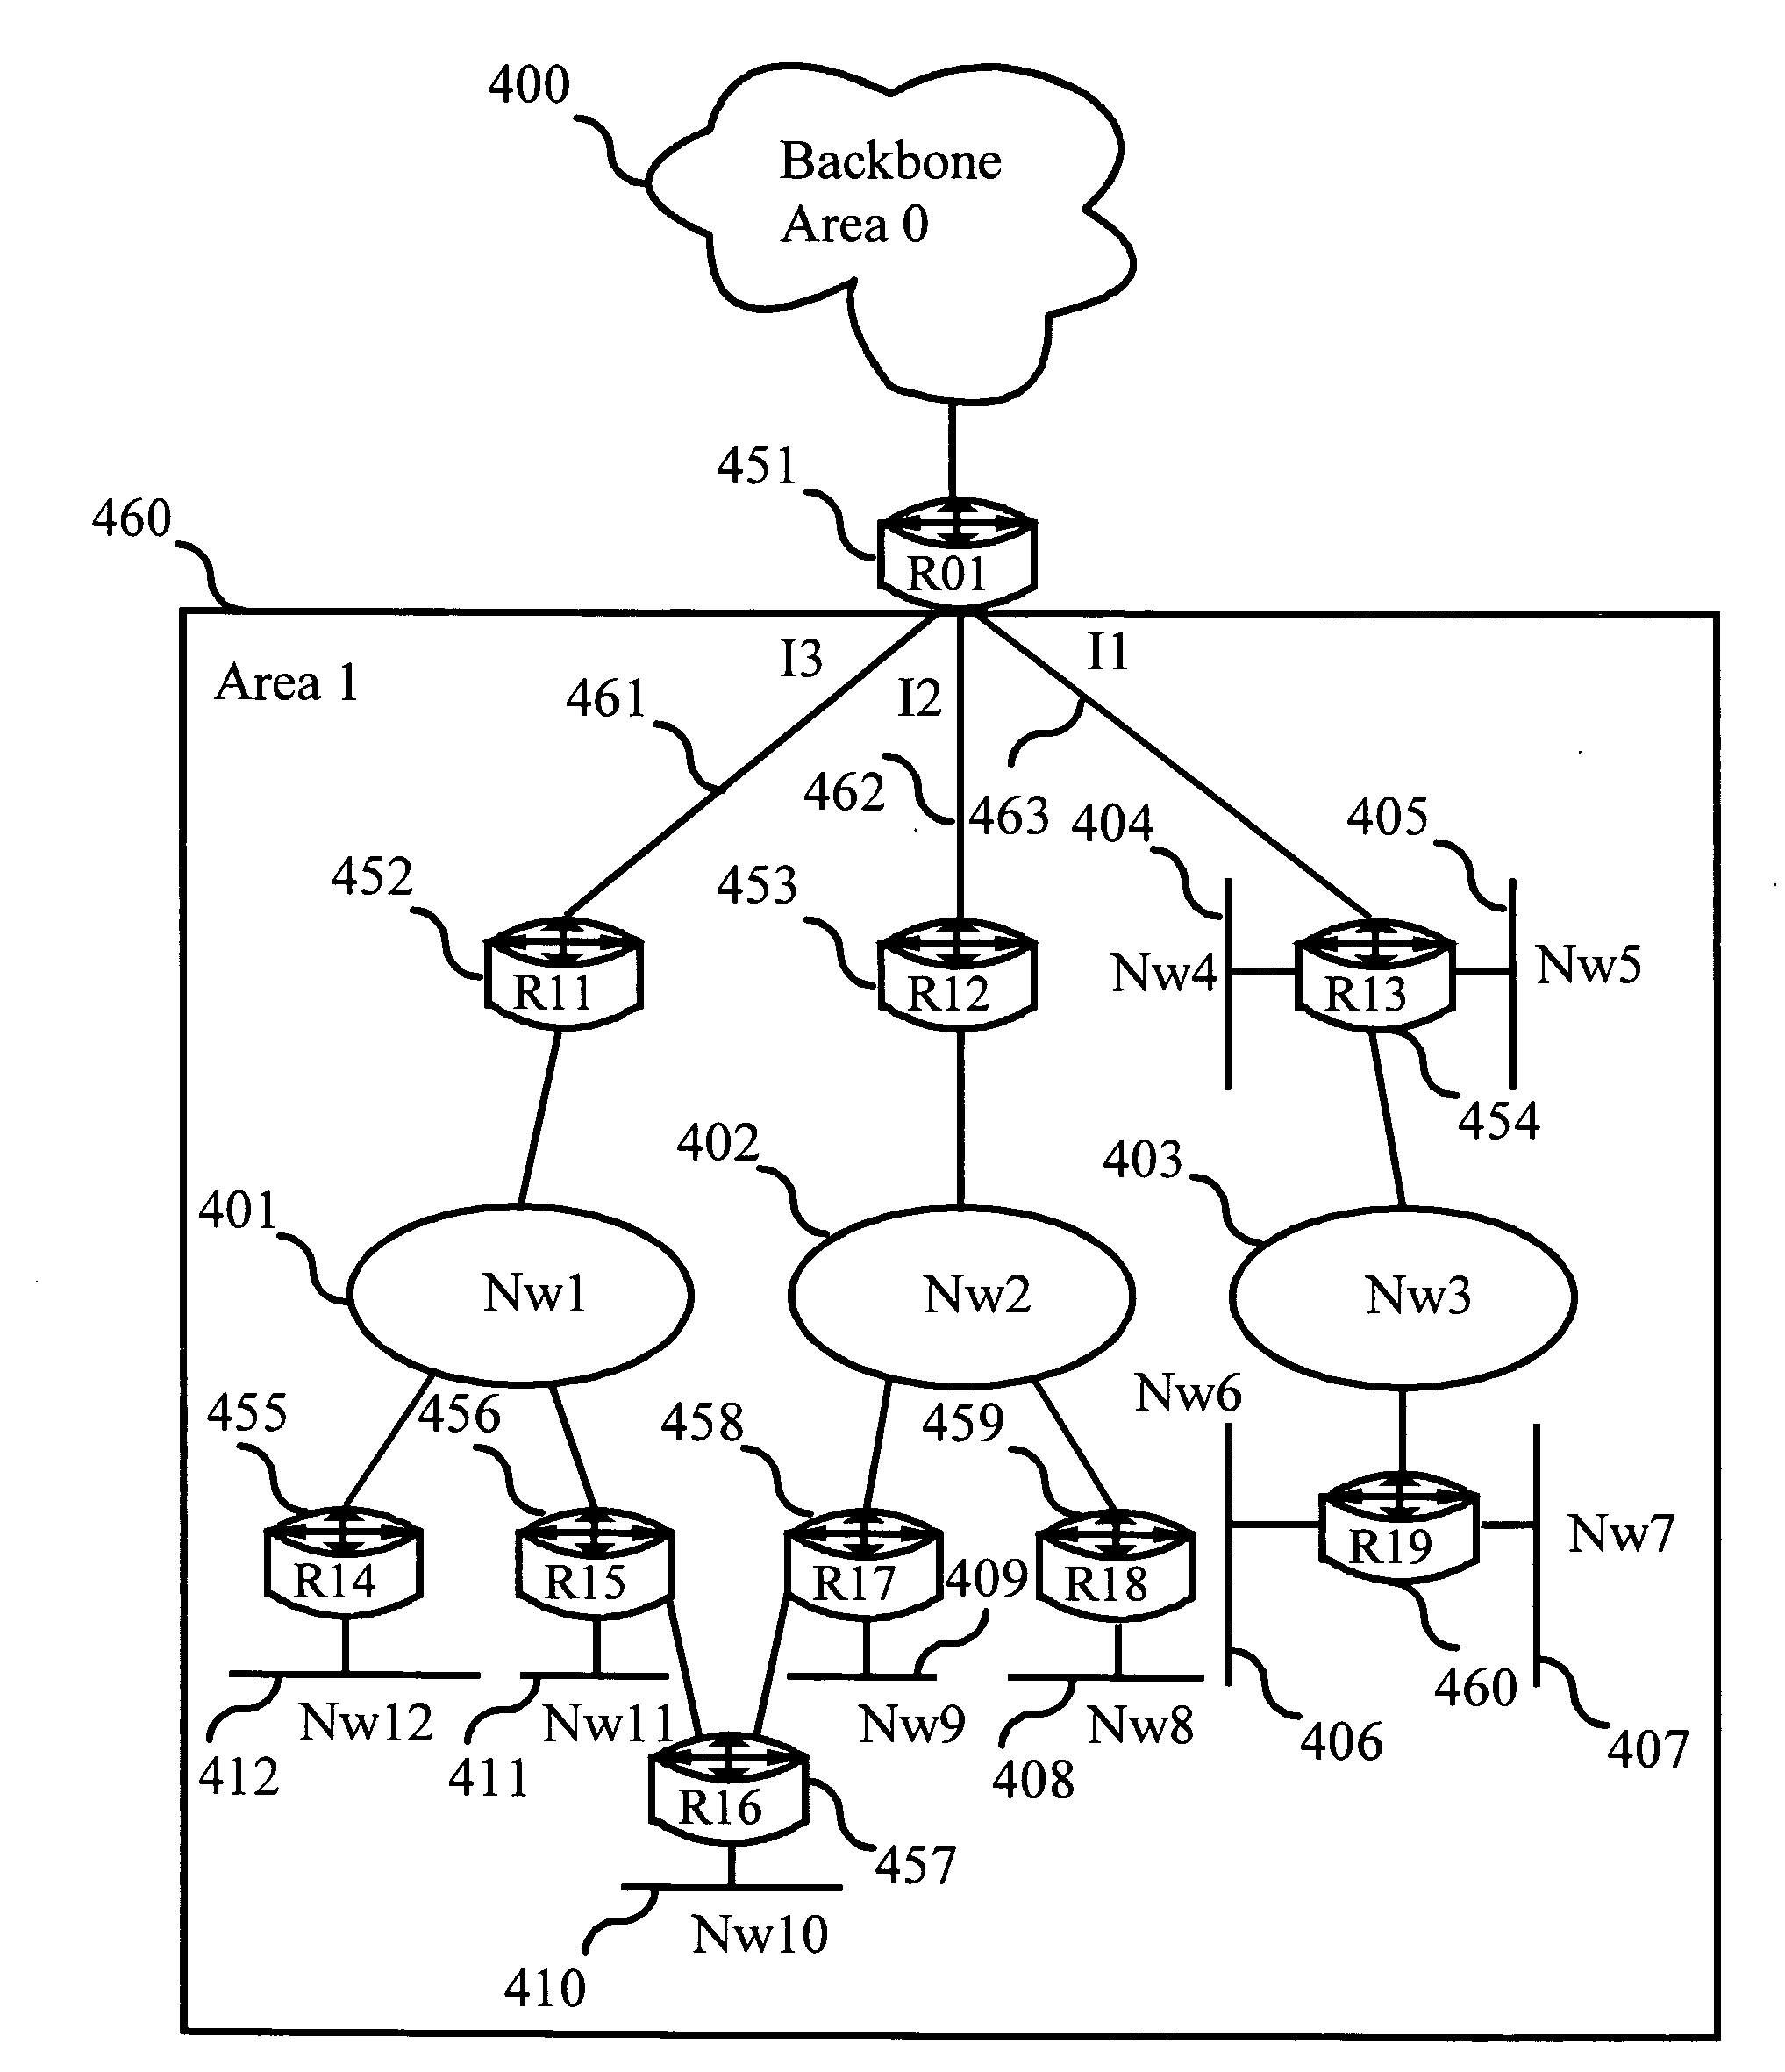 Method for automatic route aggregation in a communication system